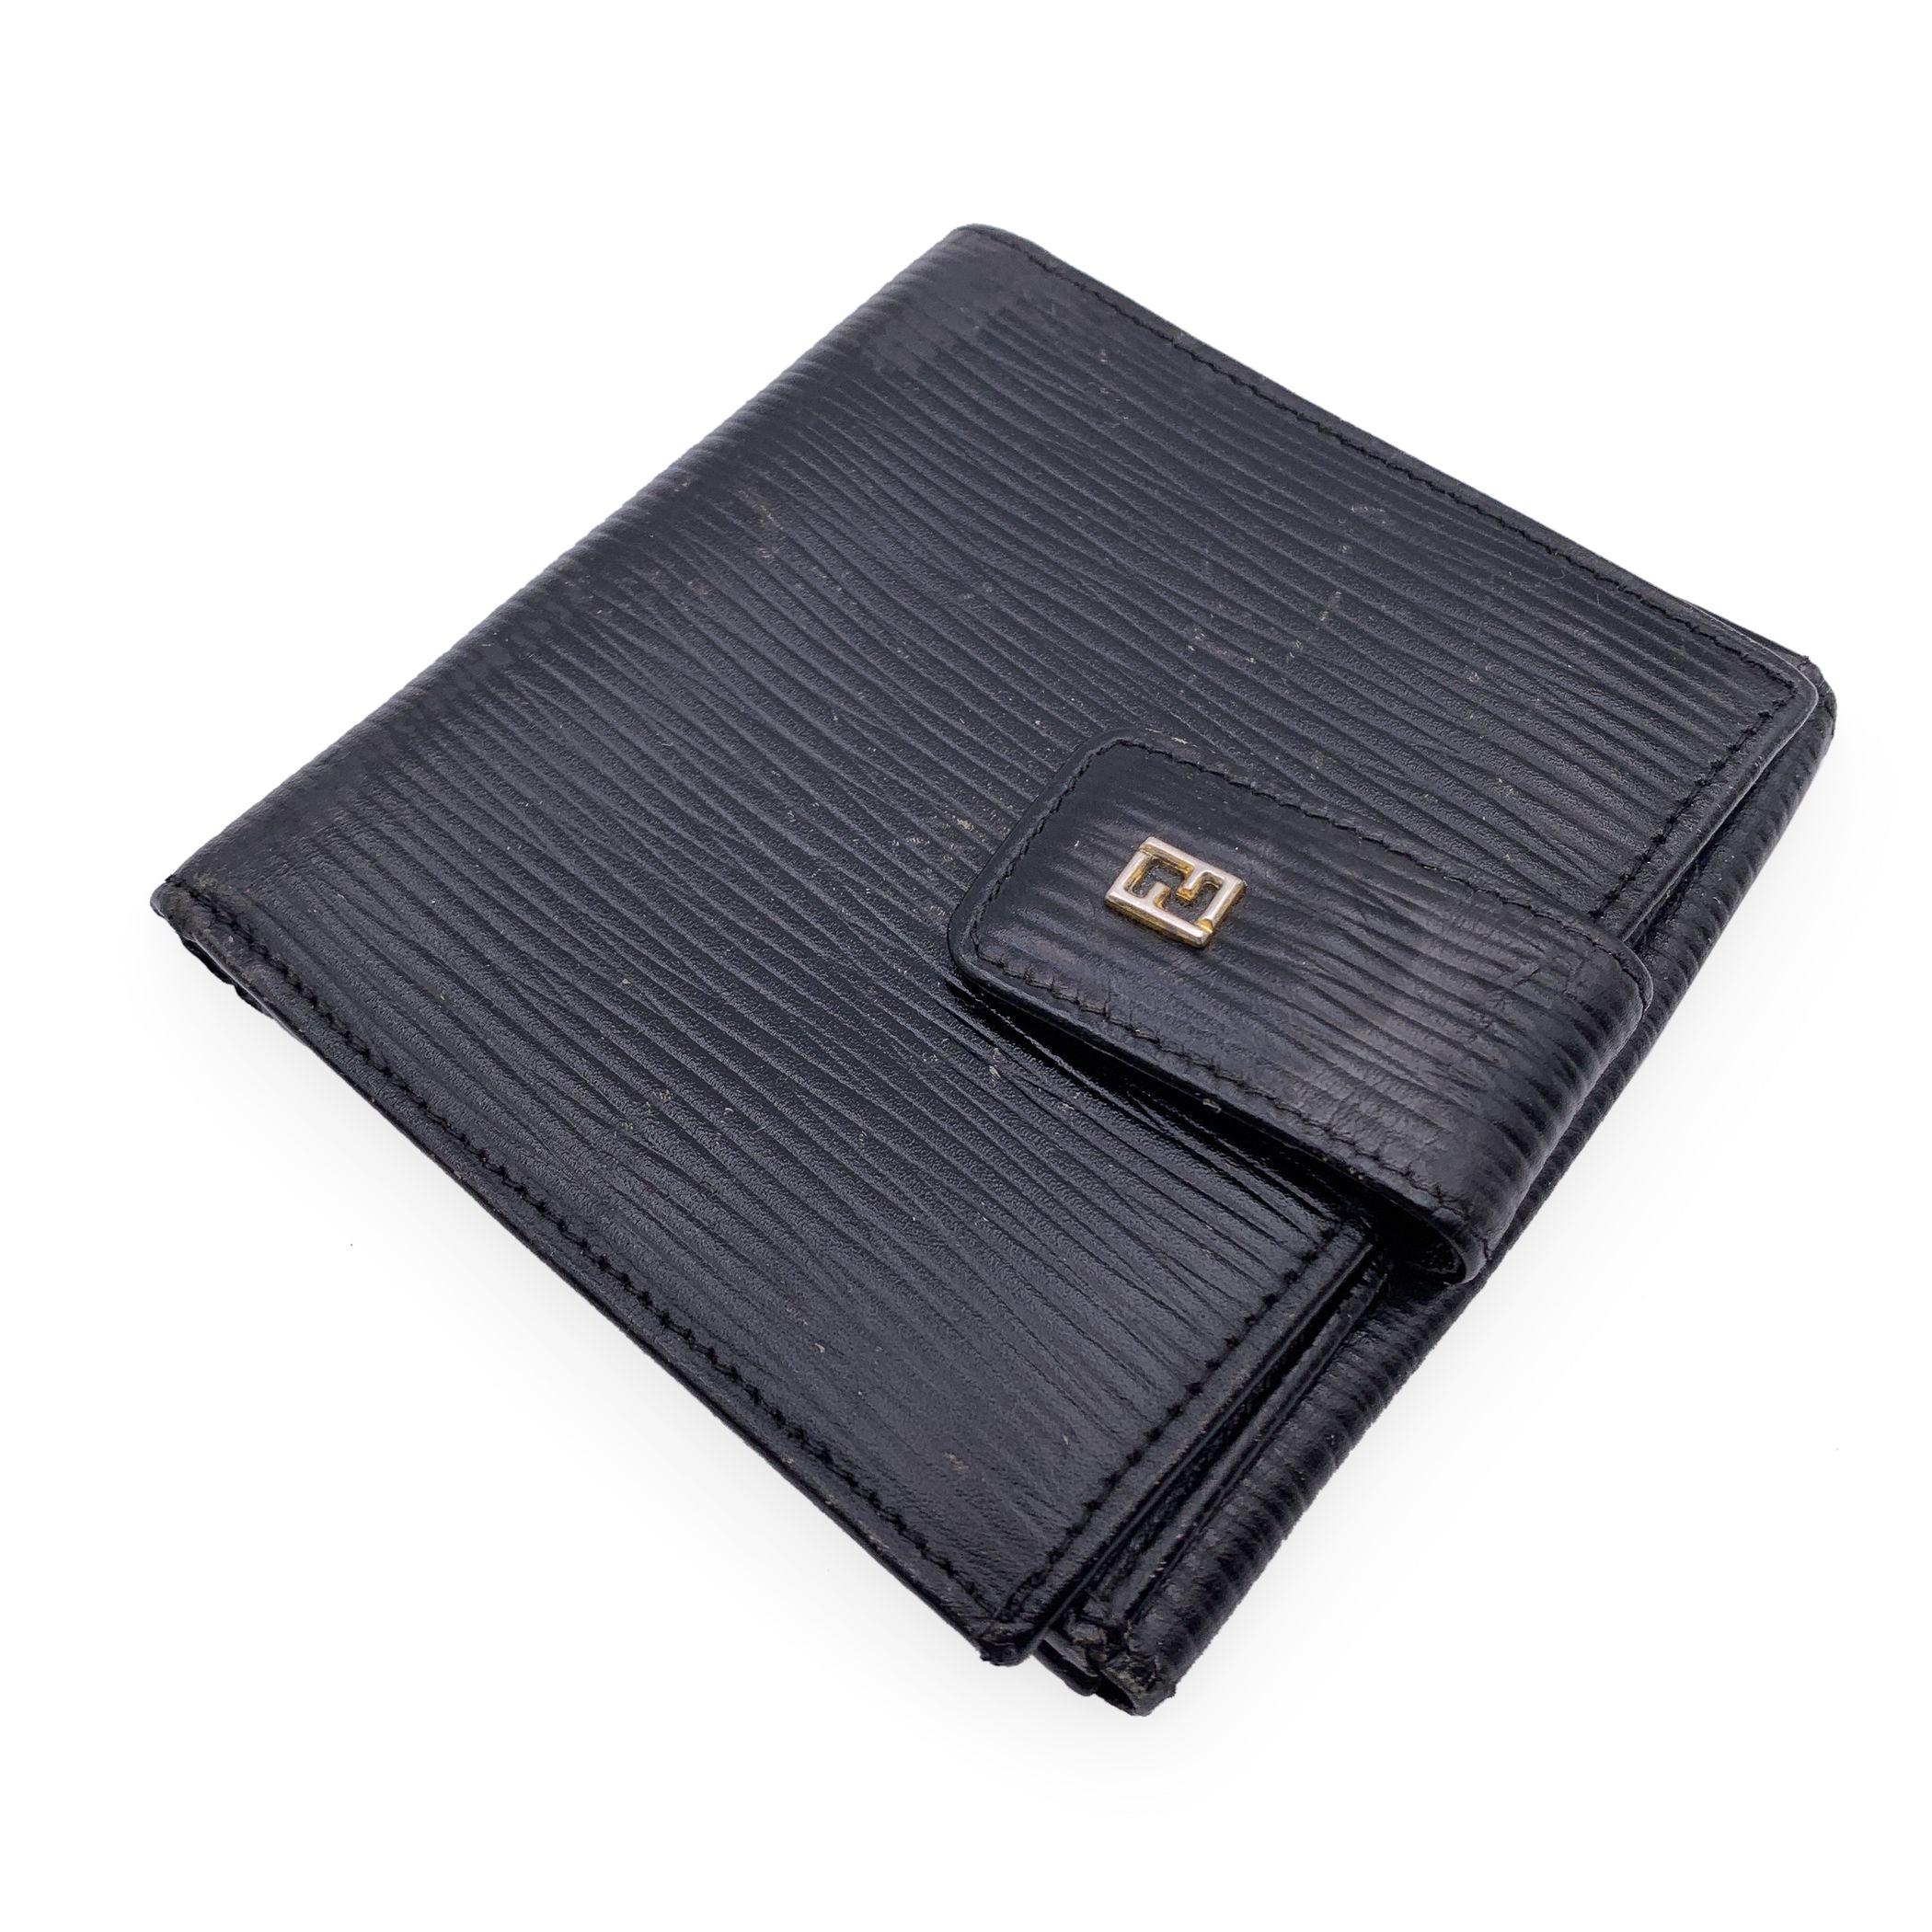 Vintage Fendi wallet in black epi leather. Bifold design. Fold over strap with button closure. 1 bill compartment, 10credit card slots, 2 open pockets and 1 coin section with kiss-lock closure. FF logo on the front. Leather and fabric lined. 'Fendi